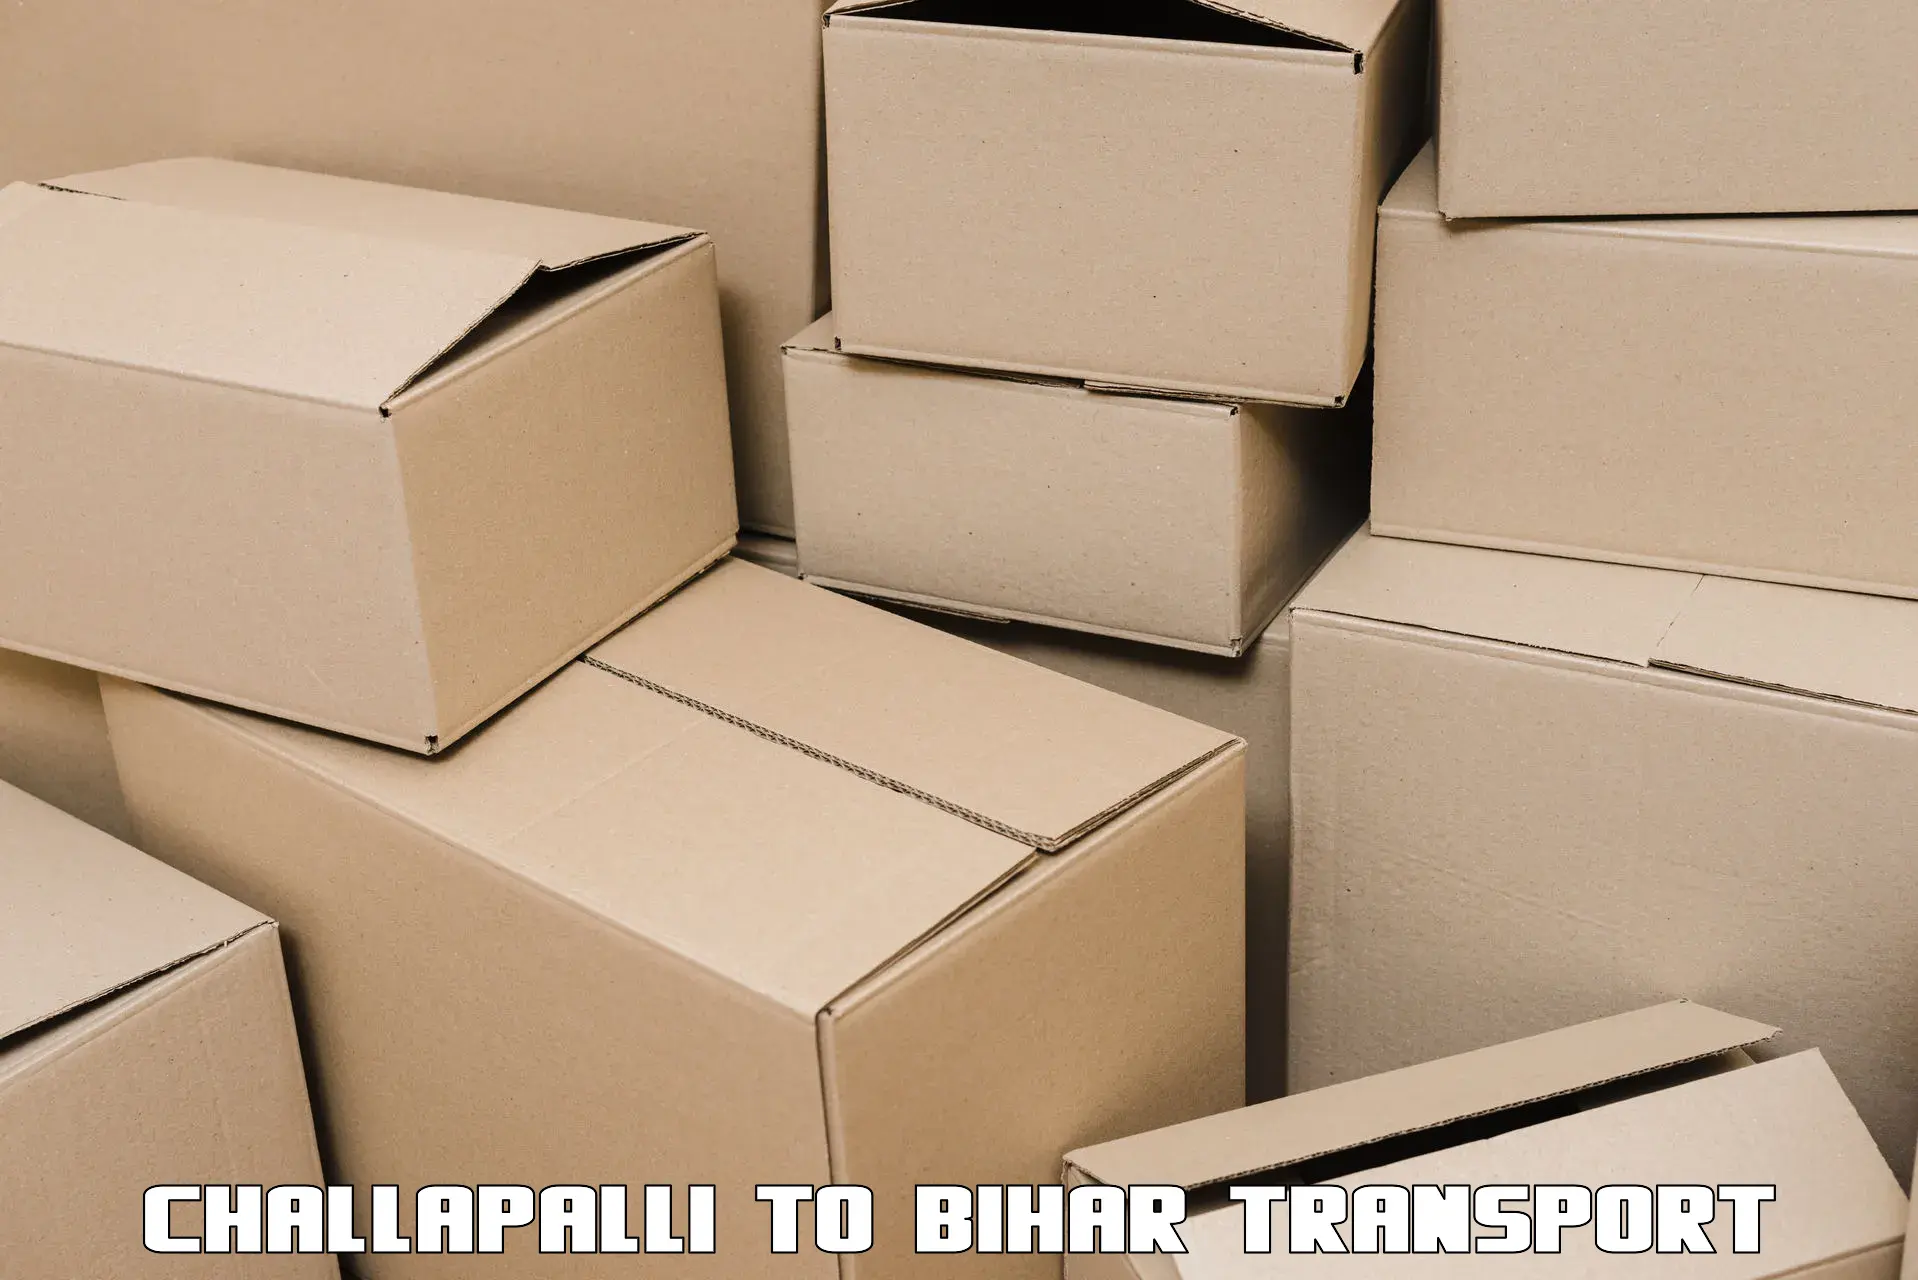 Air cargo transport services Challapalli to Chakia